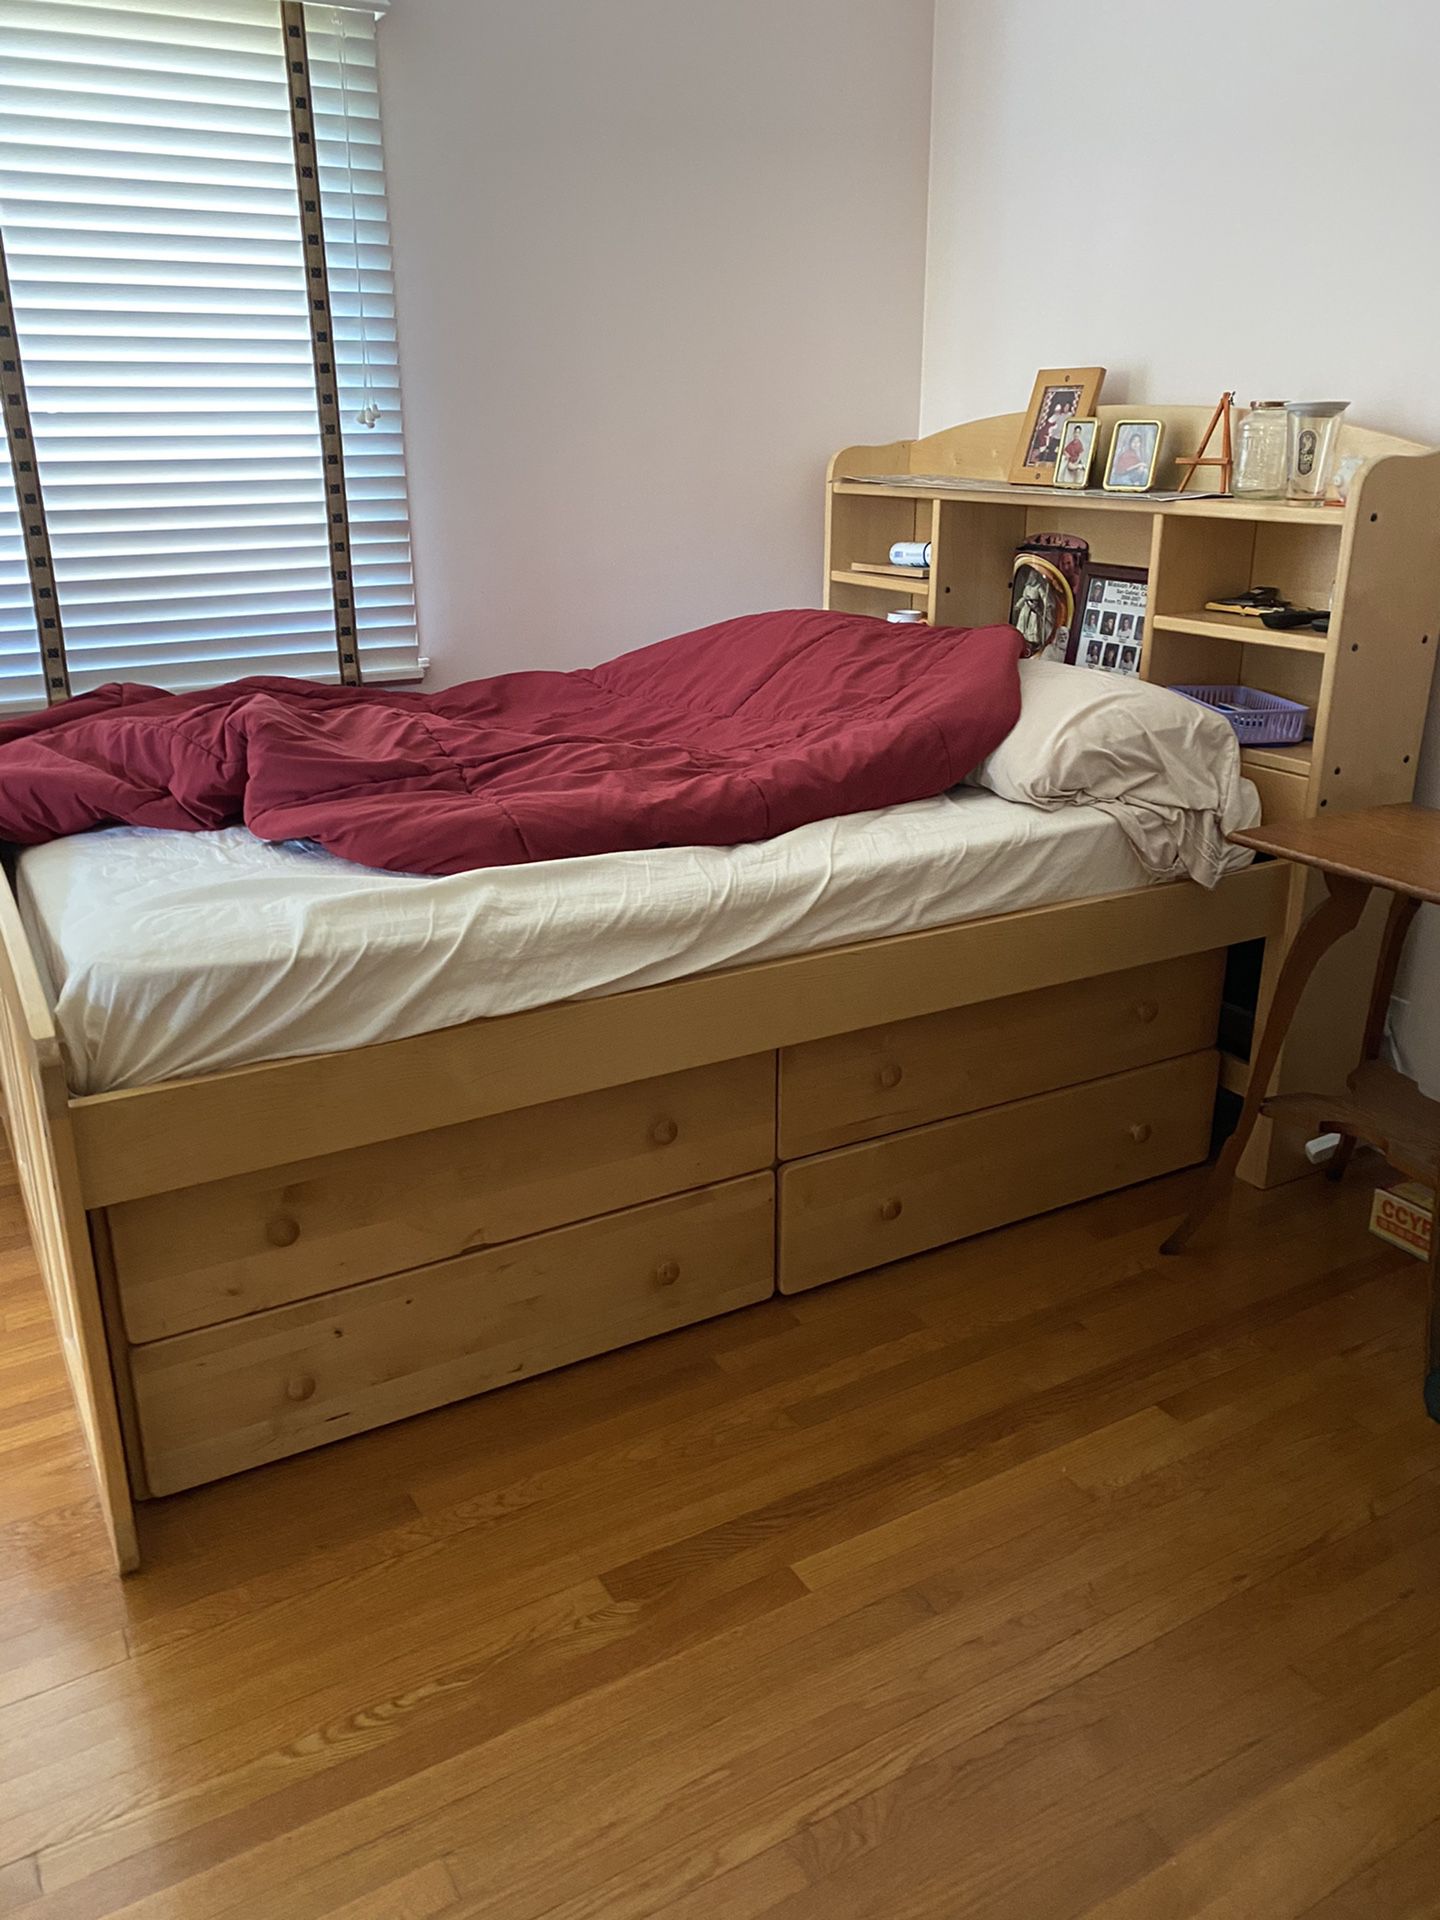 Full size mattress and solid wood bed frame with storage under